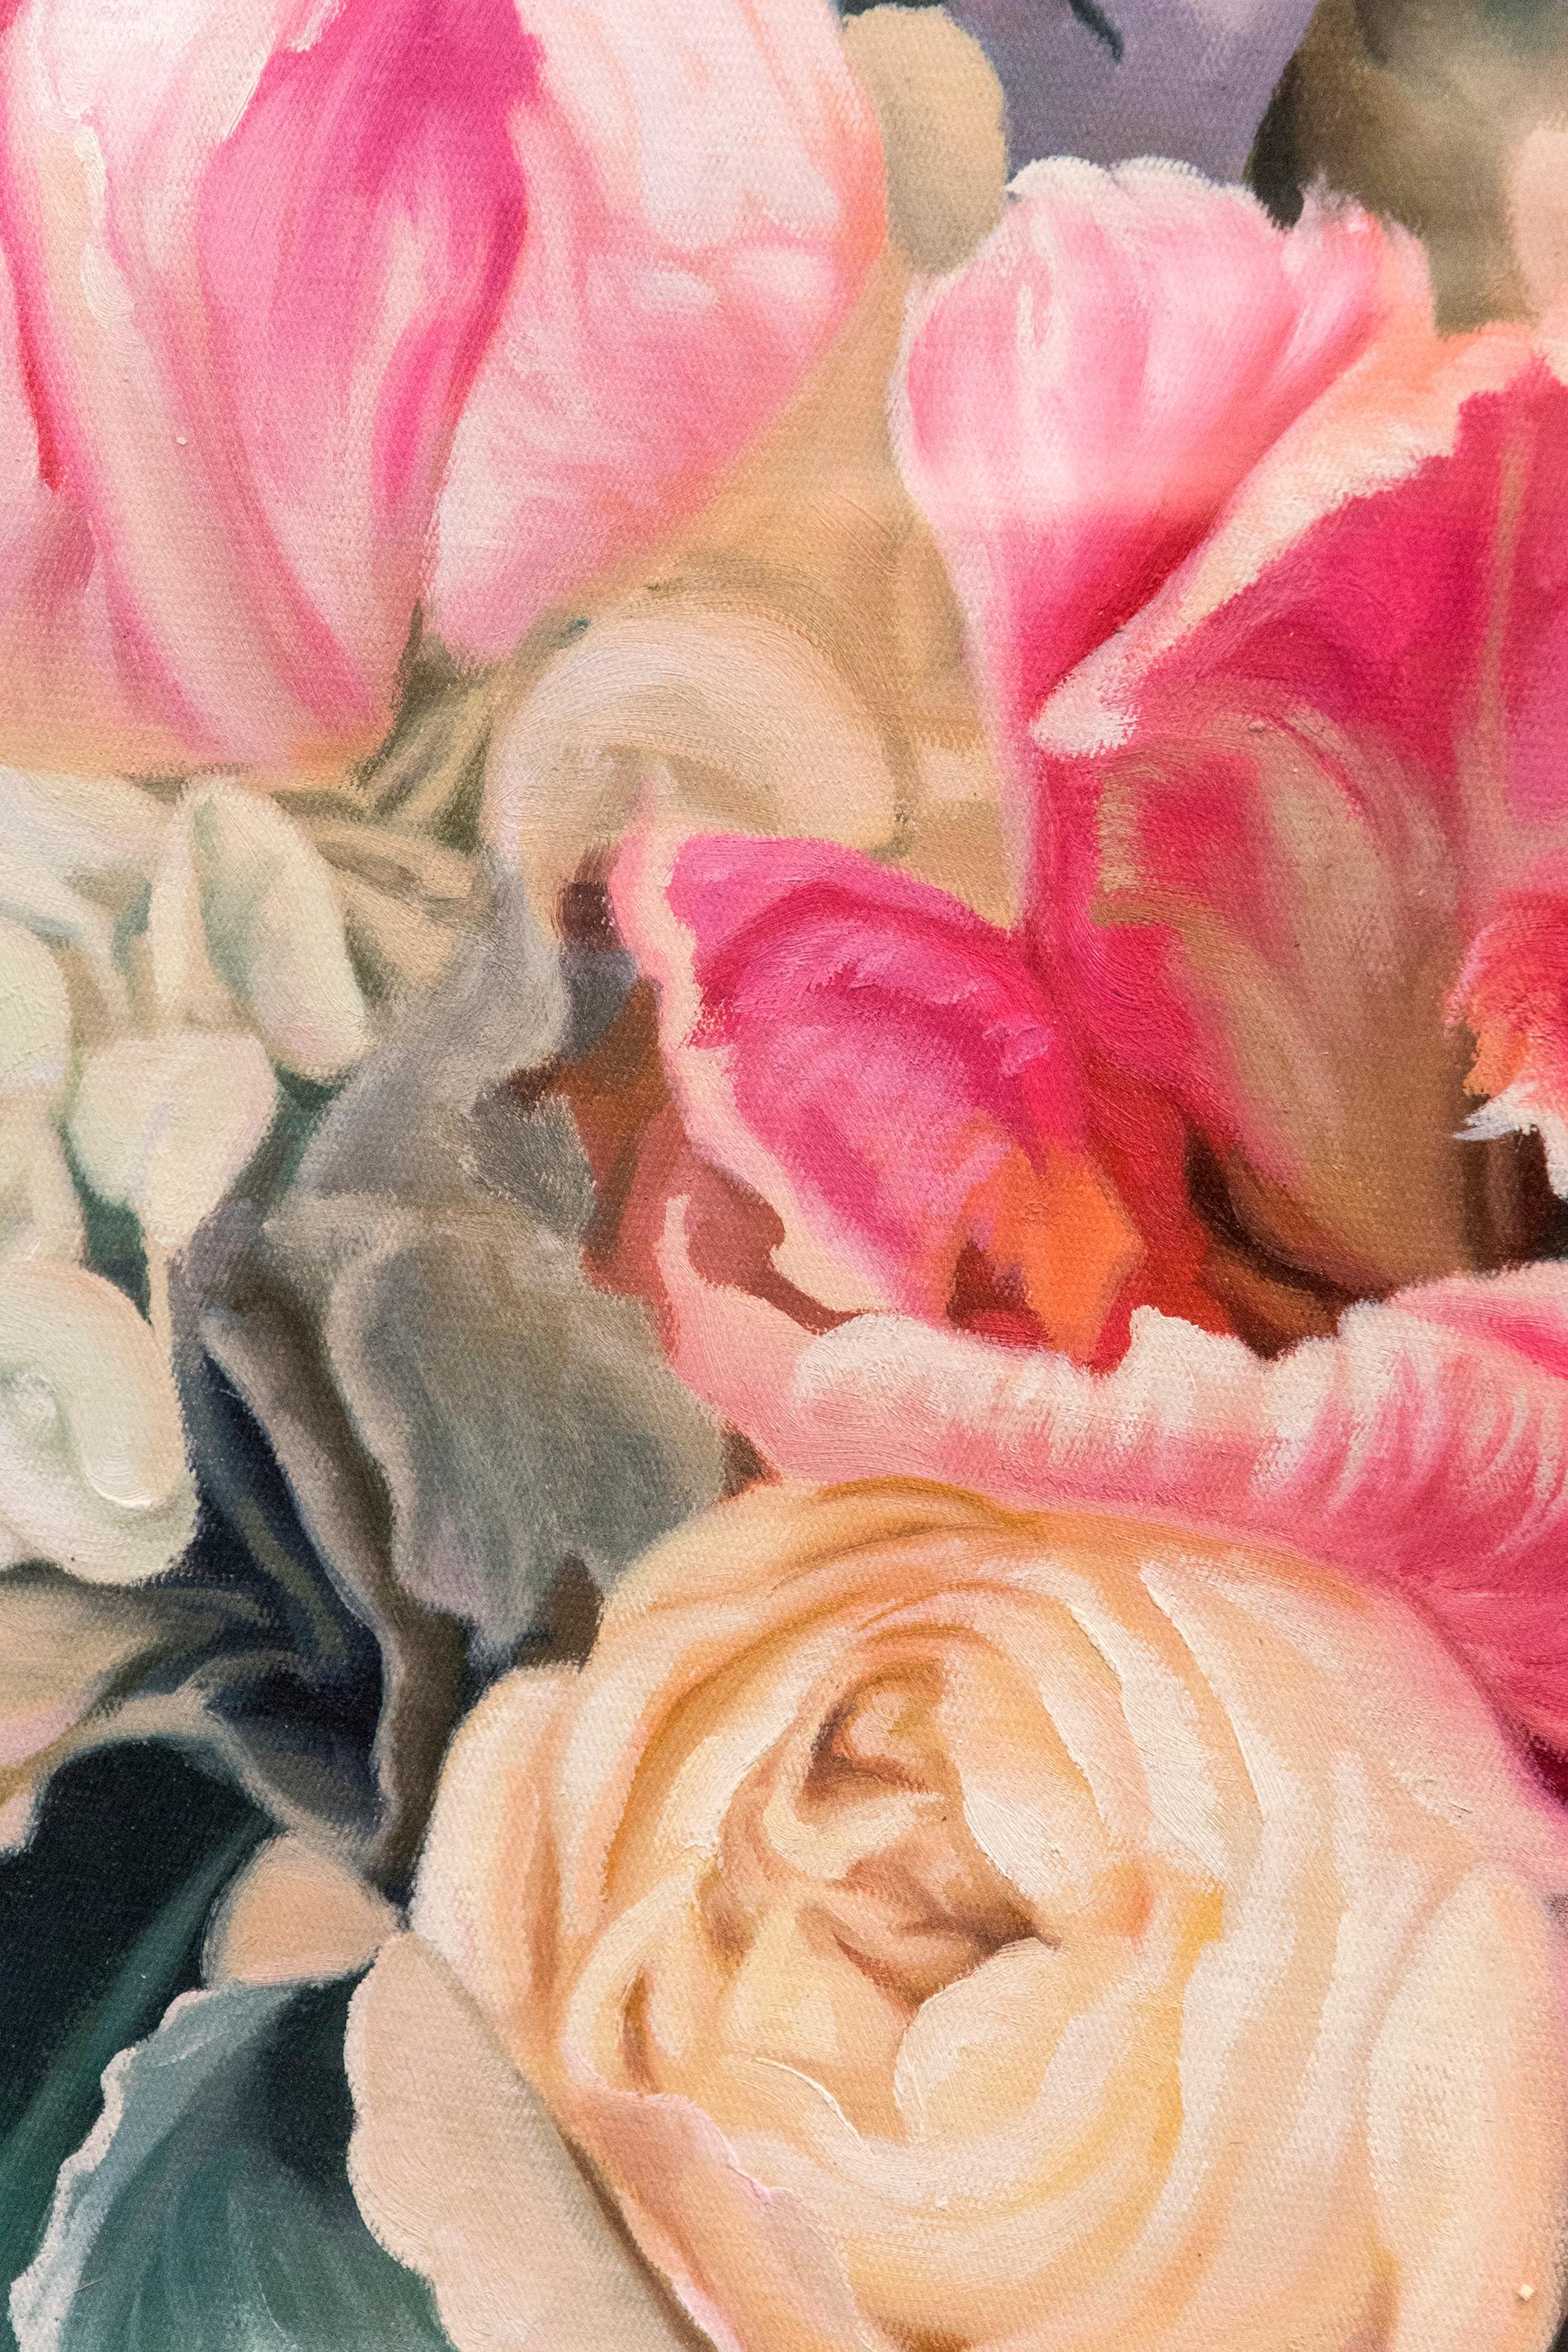 Rendered realistically in shades of pink and green, an arrangement of roses is juxtaposed with collage. This mixed media composition by Peter Hoffer incorporates a rich assortment of vintage wallpaper with passages of acrylic. The work is encased in